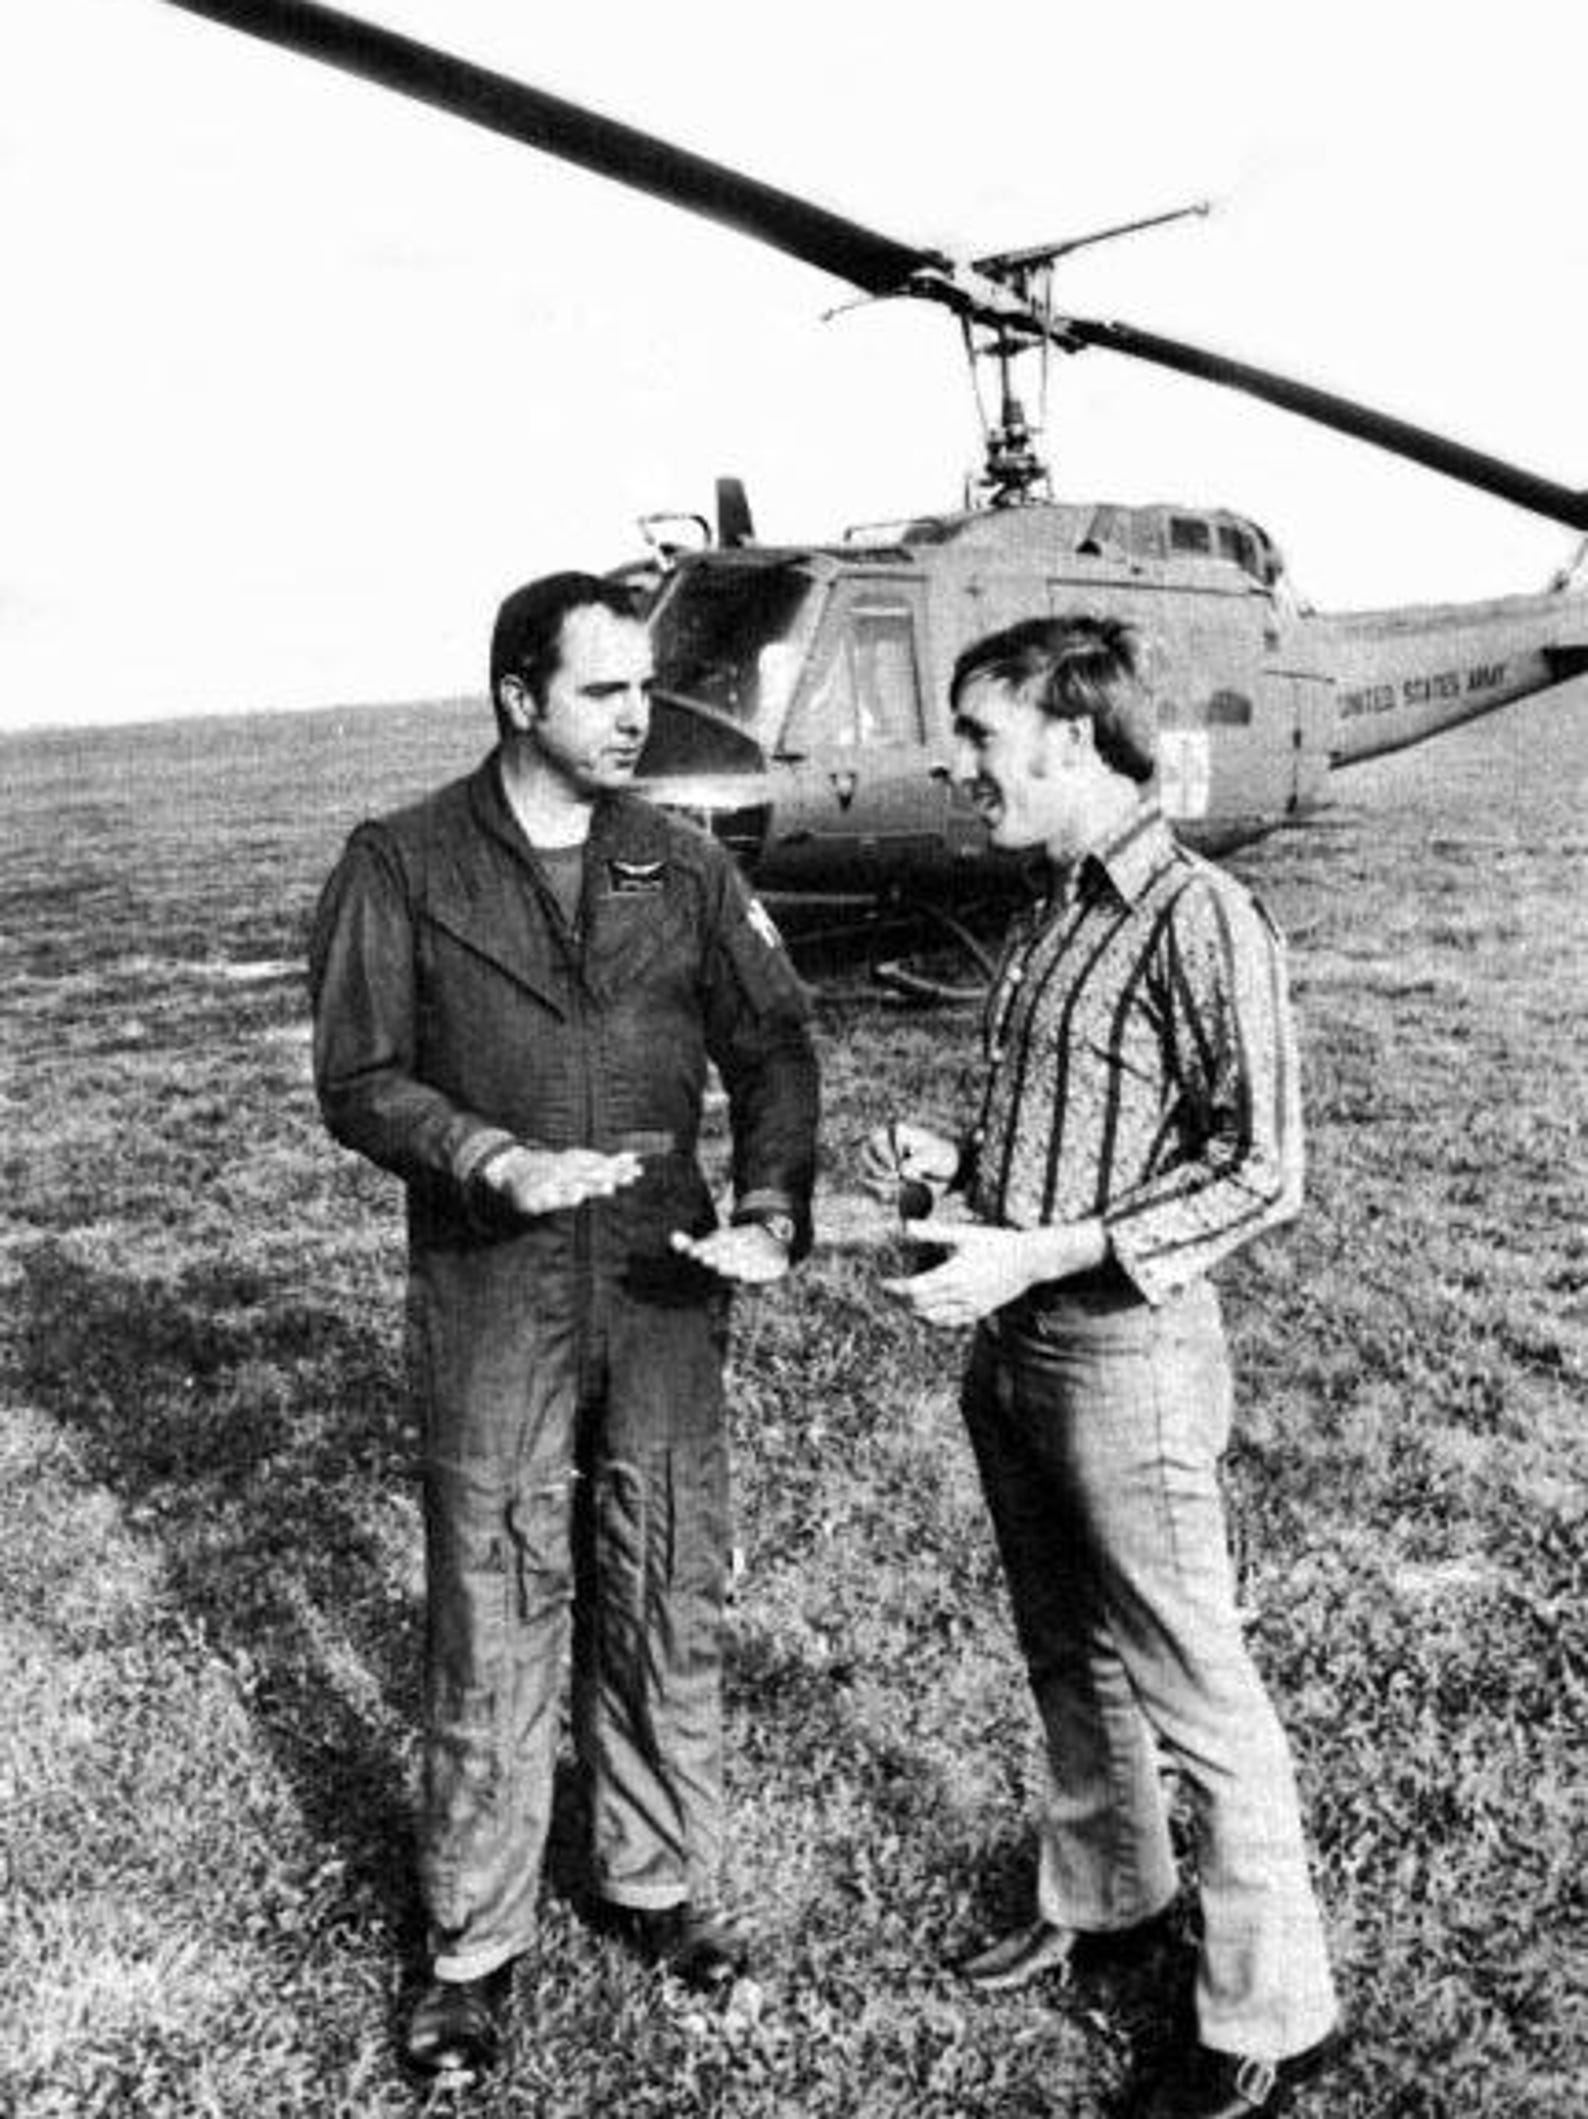 Army Reserve Capt. Lawrence Coyne speaks with crew member Arrigo Jezzi, who was flying Coyne’s helicopter when the crew reportedly encountered a UFO in October 1973.